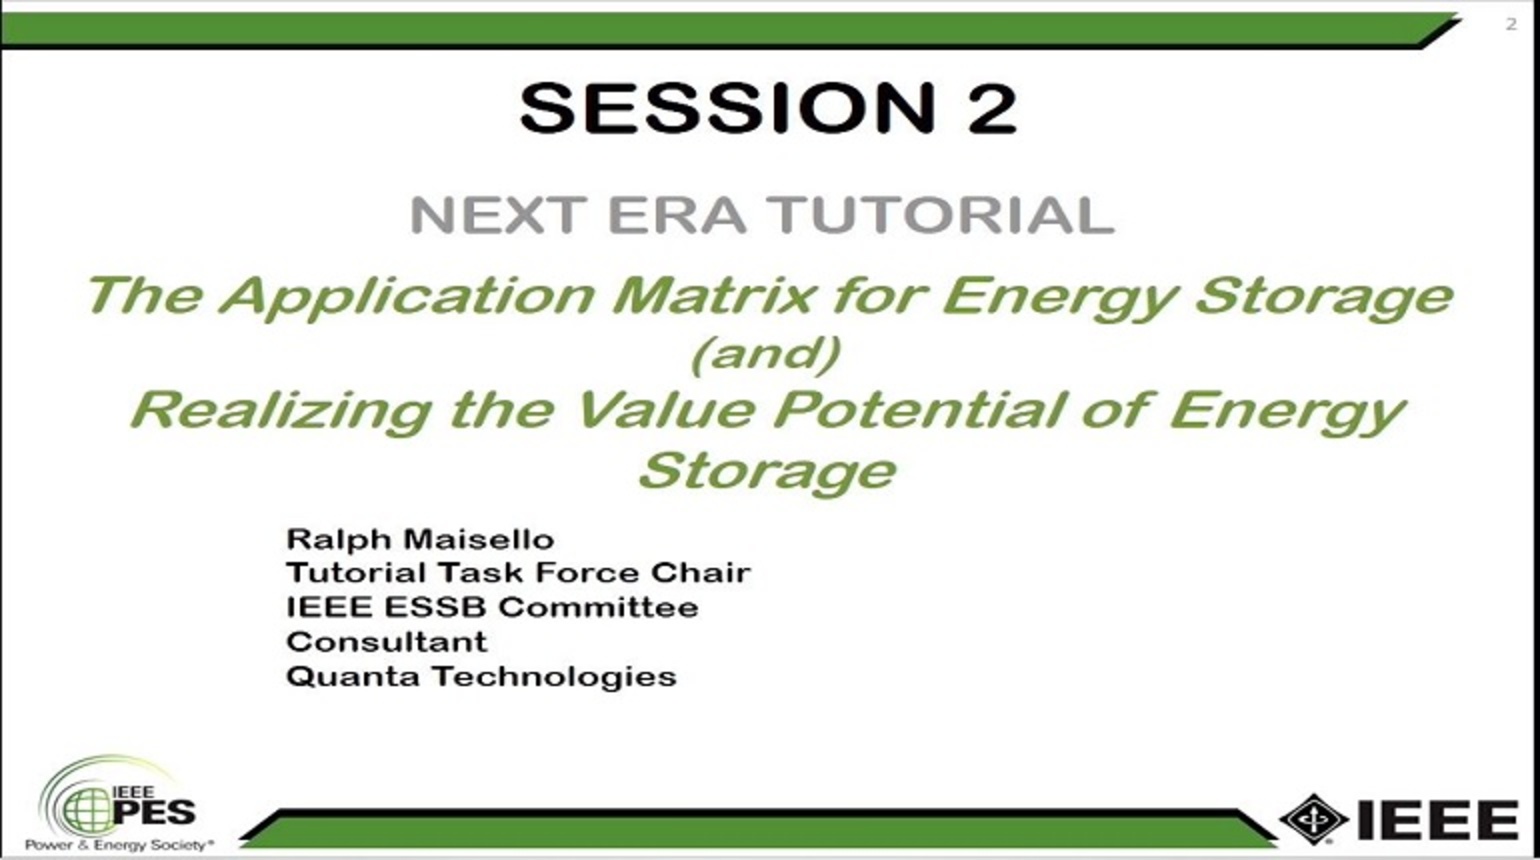 Energy Storage Tutorial: Session 2 of 4 - The Application Matrix for Electrical Energy Storage